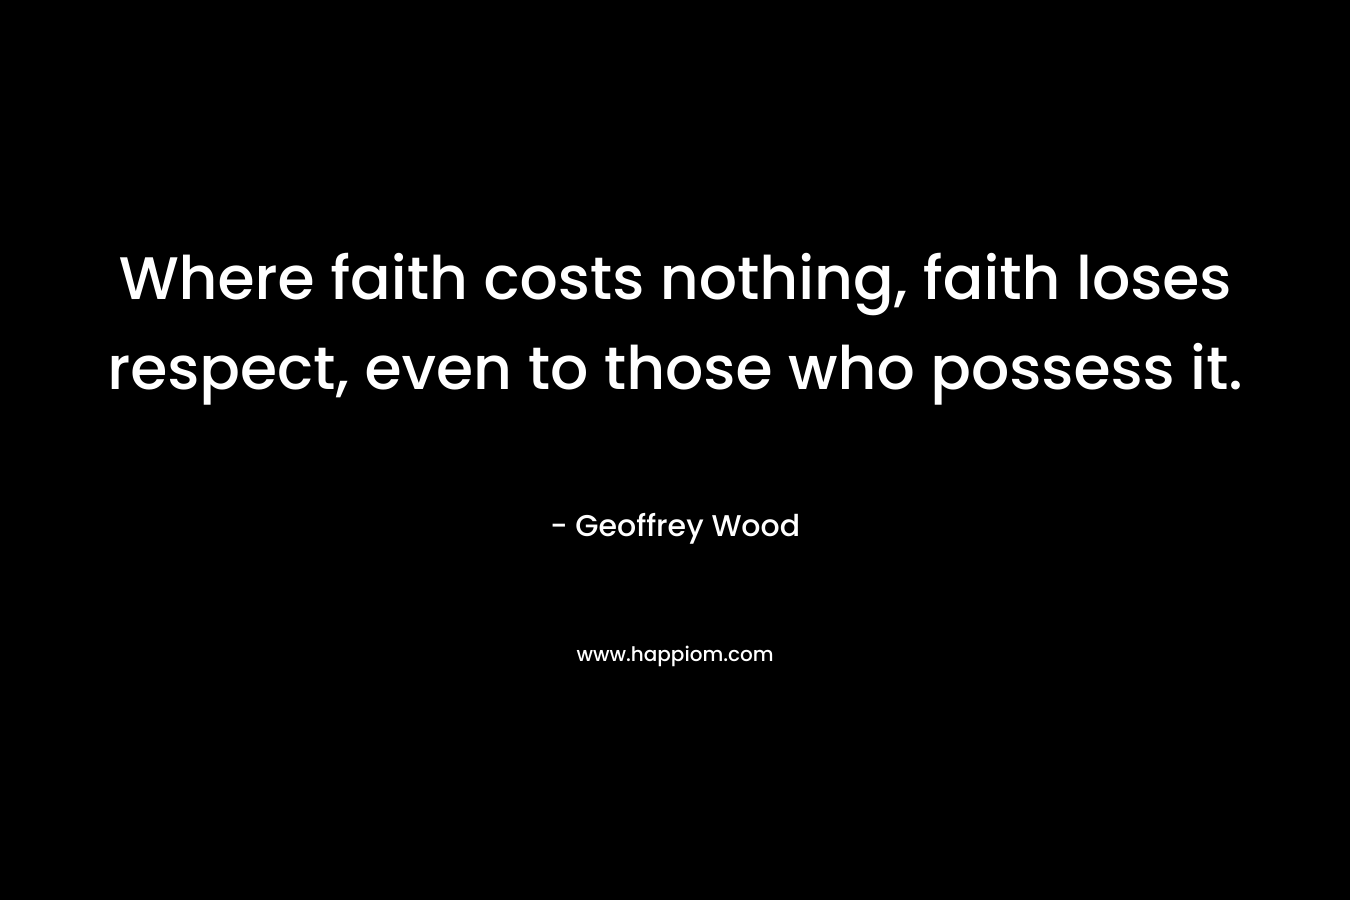 Where faith costs nothing, faith loses respect, even to those who possess it. – Geoffrey Wood